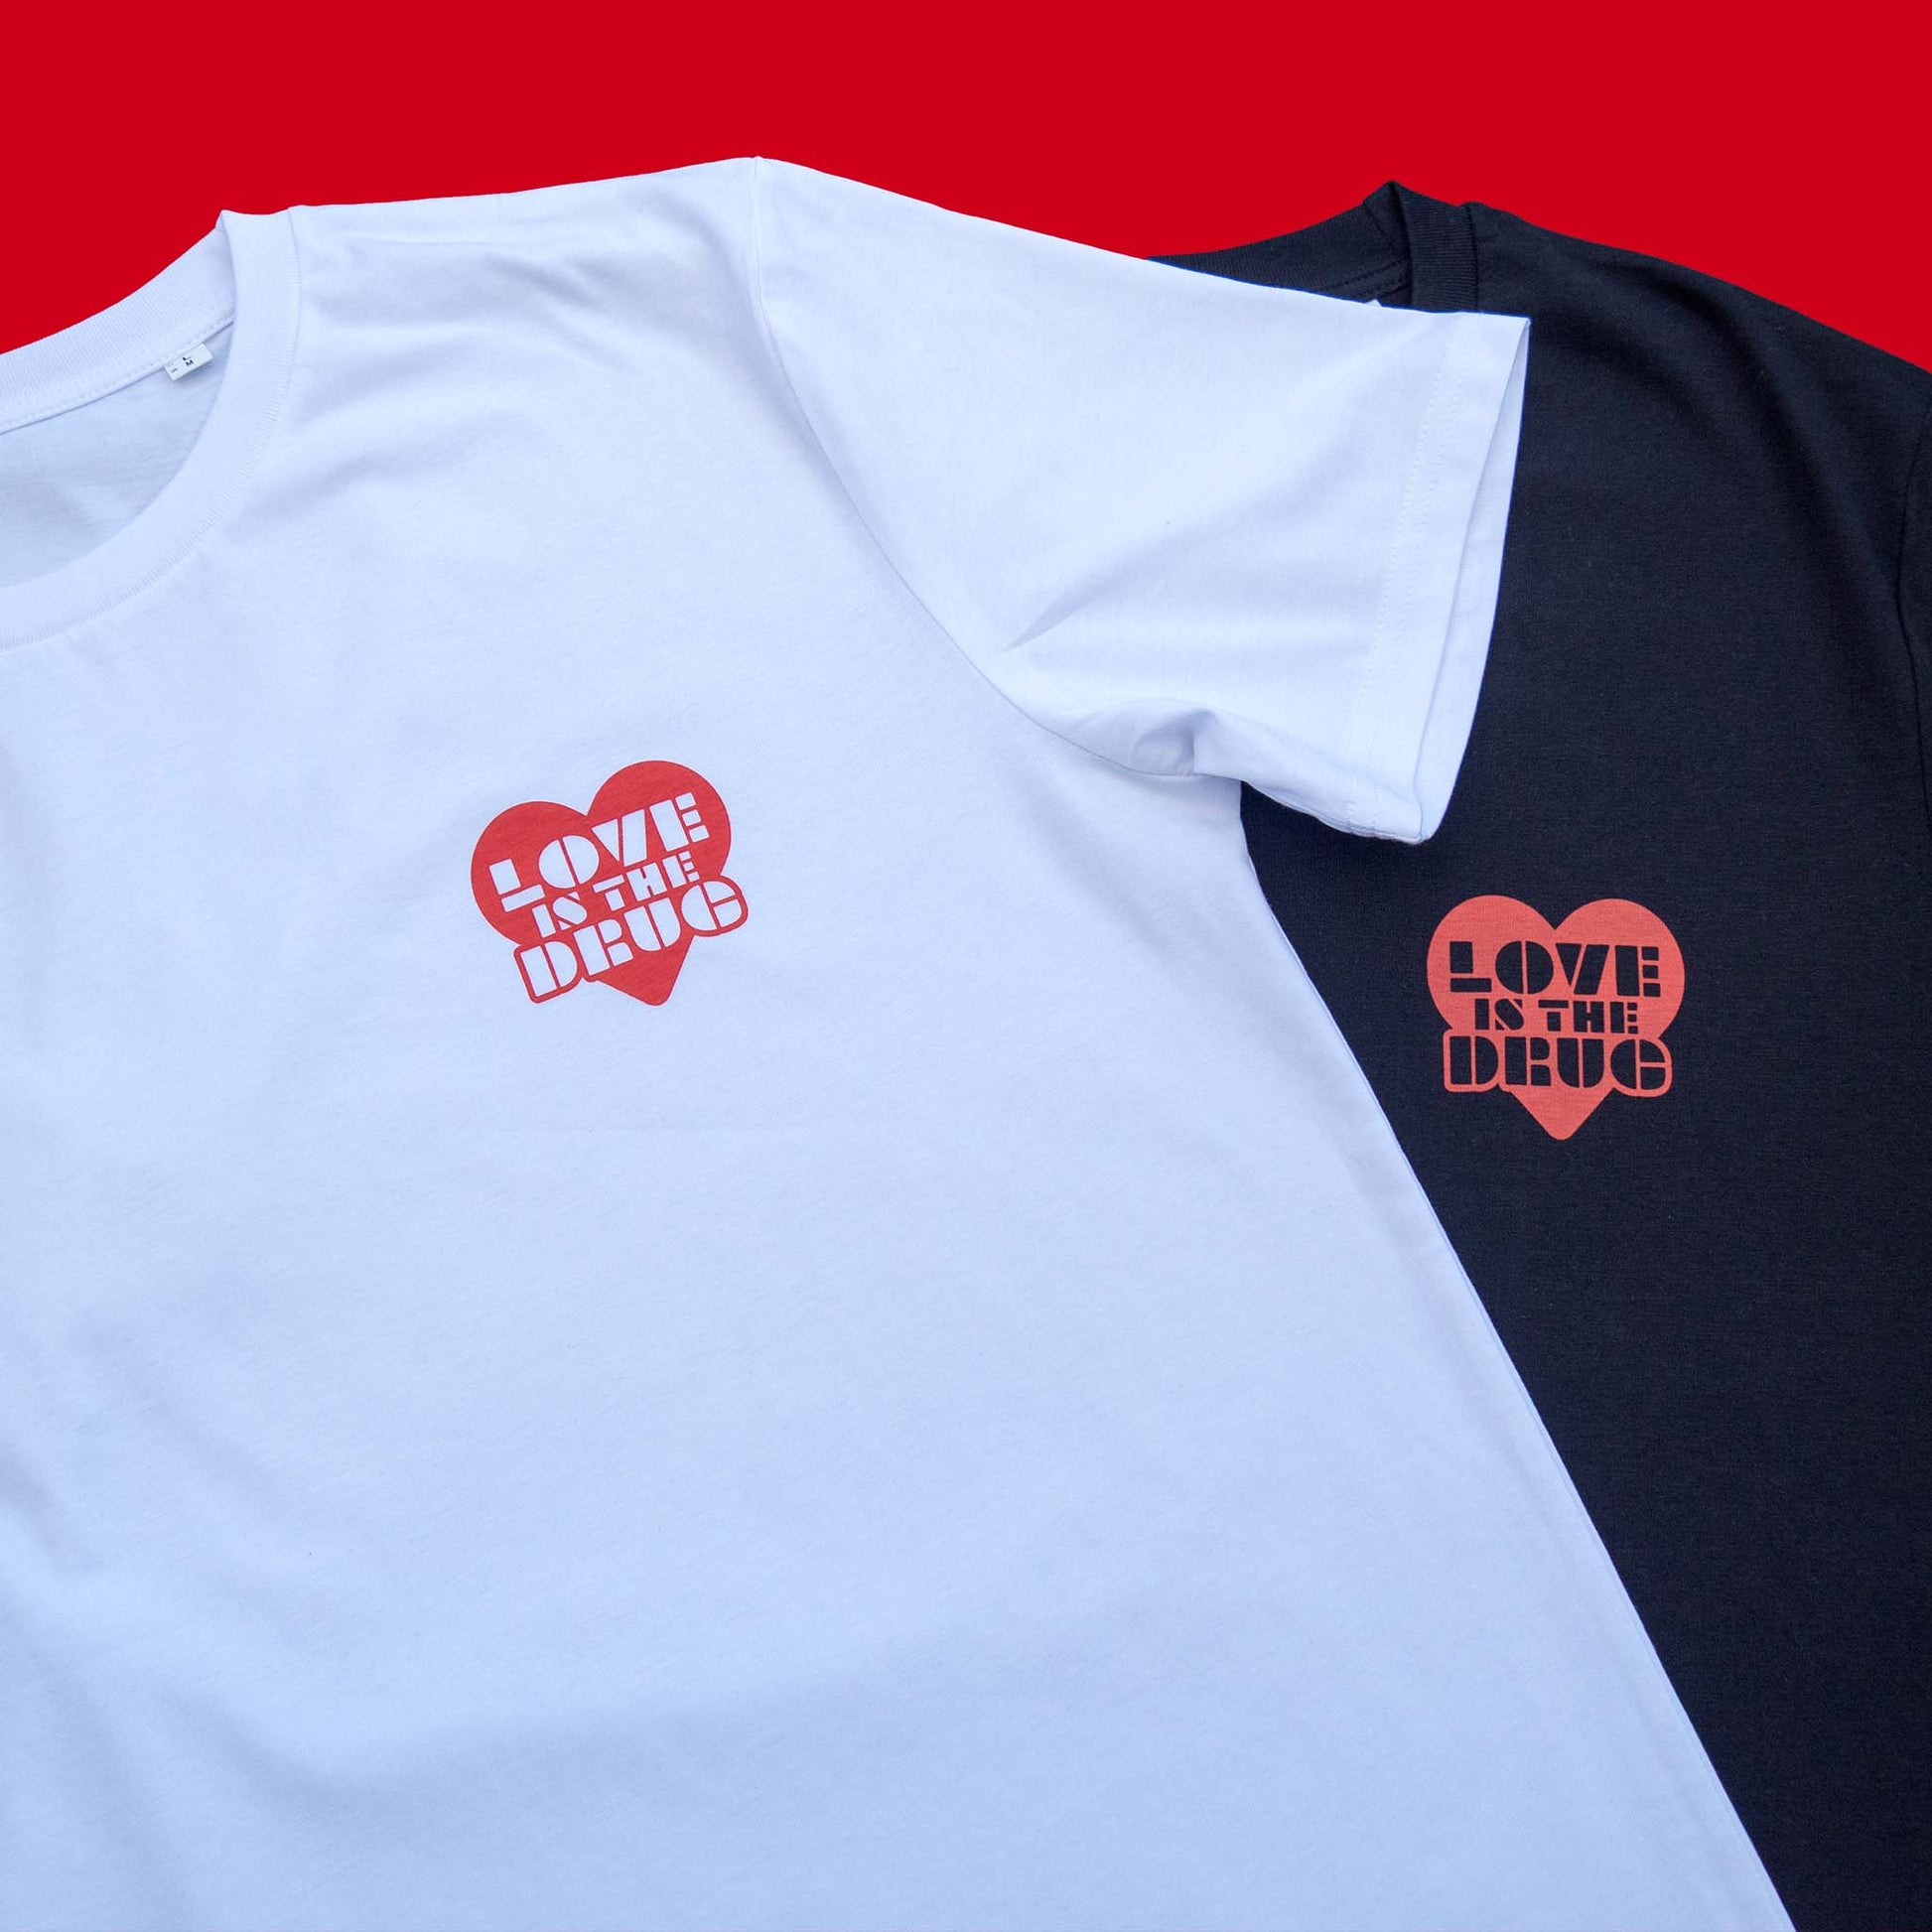 Love is the drug black and white graphic t-shirt